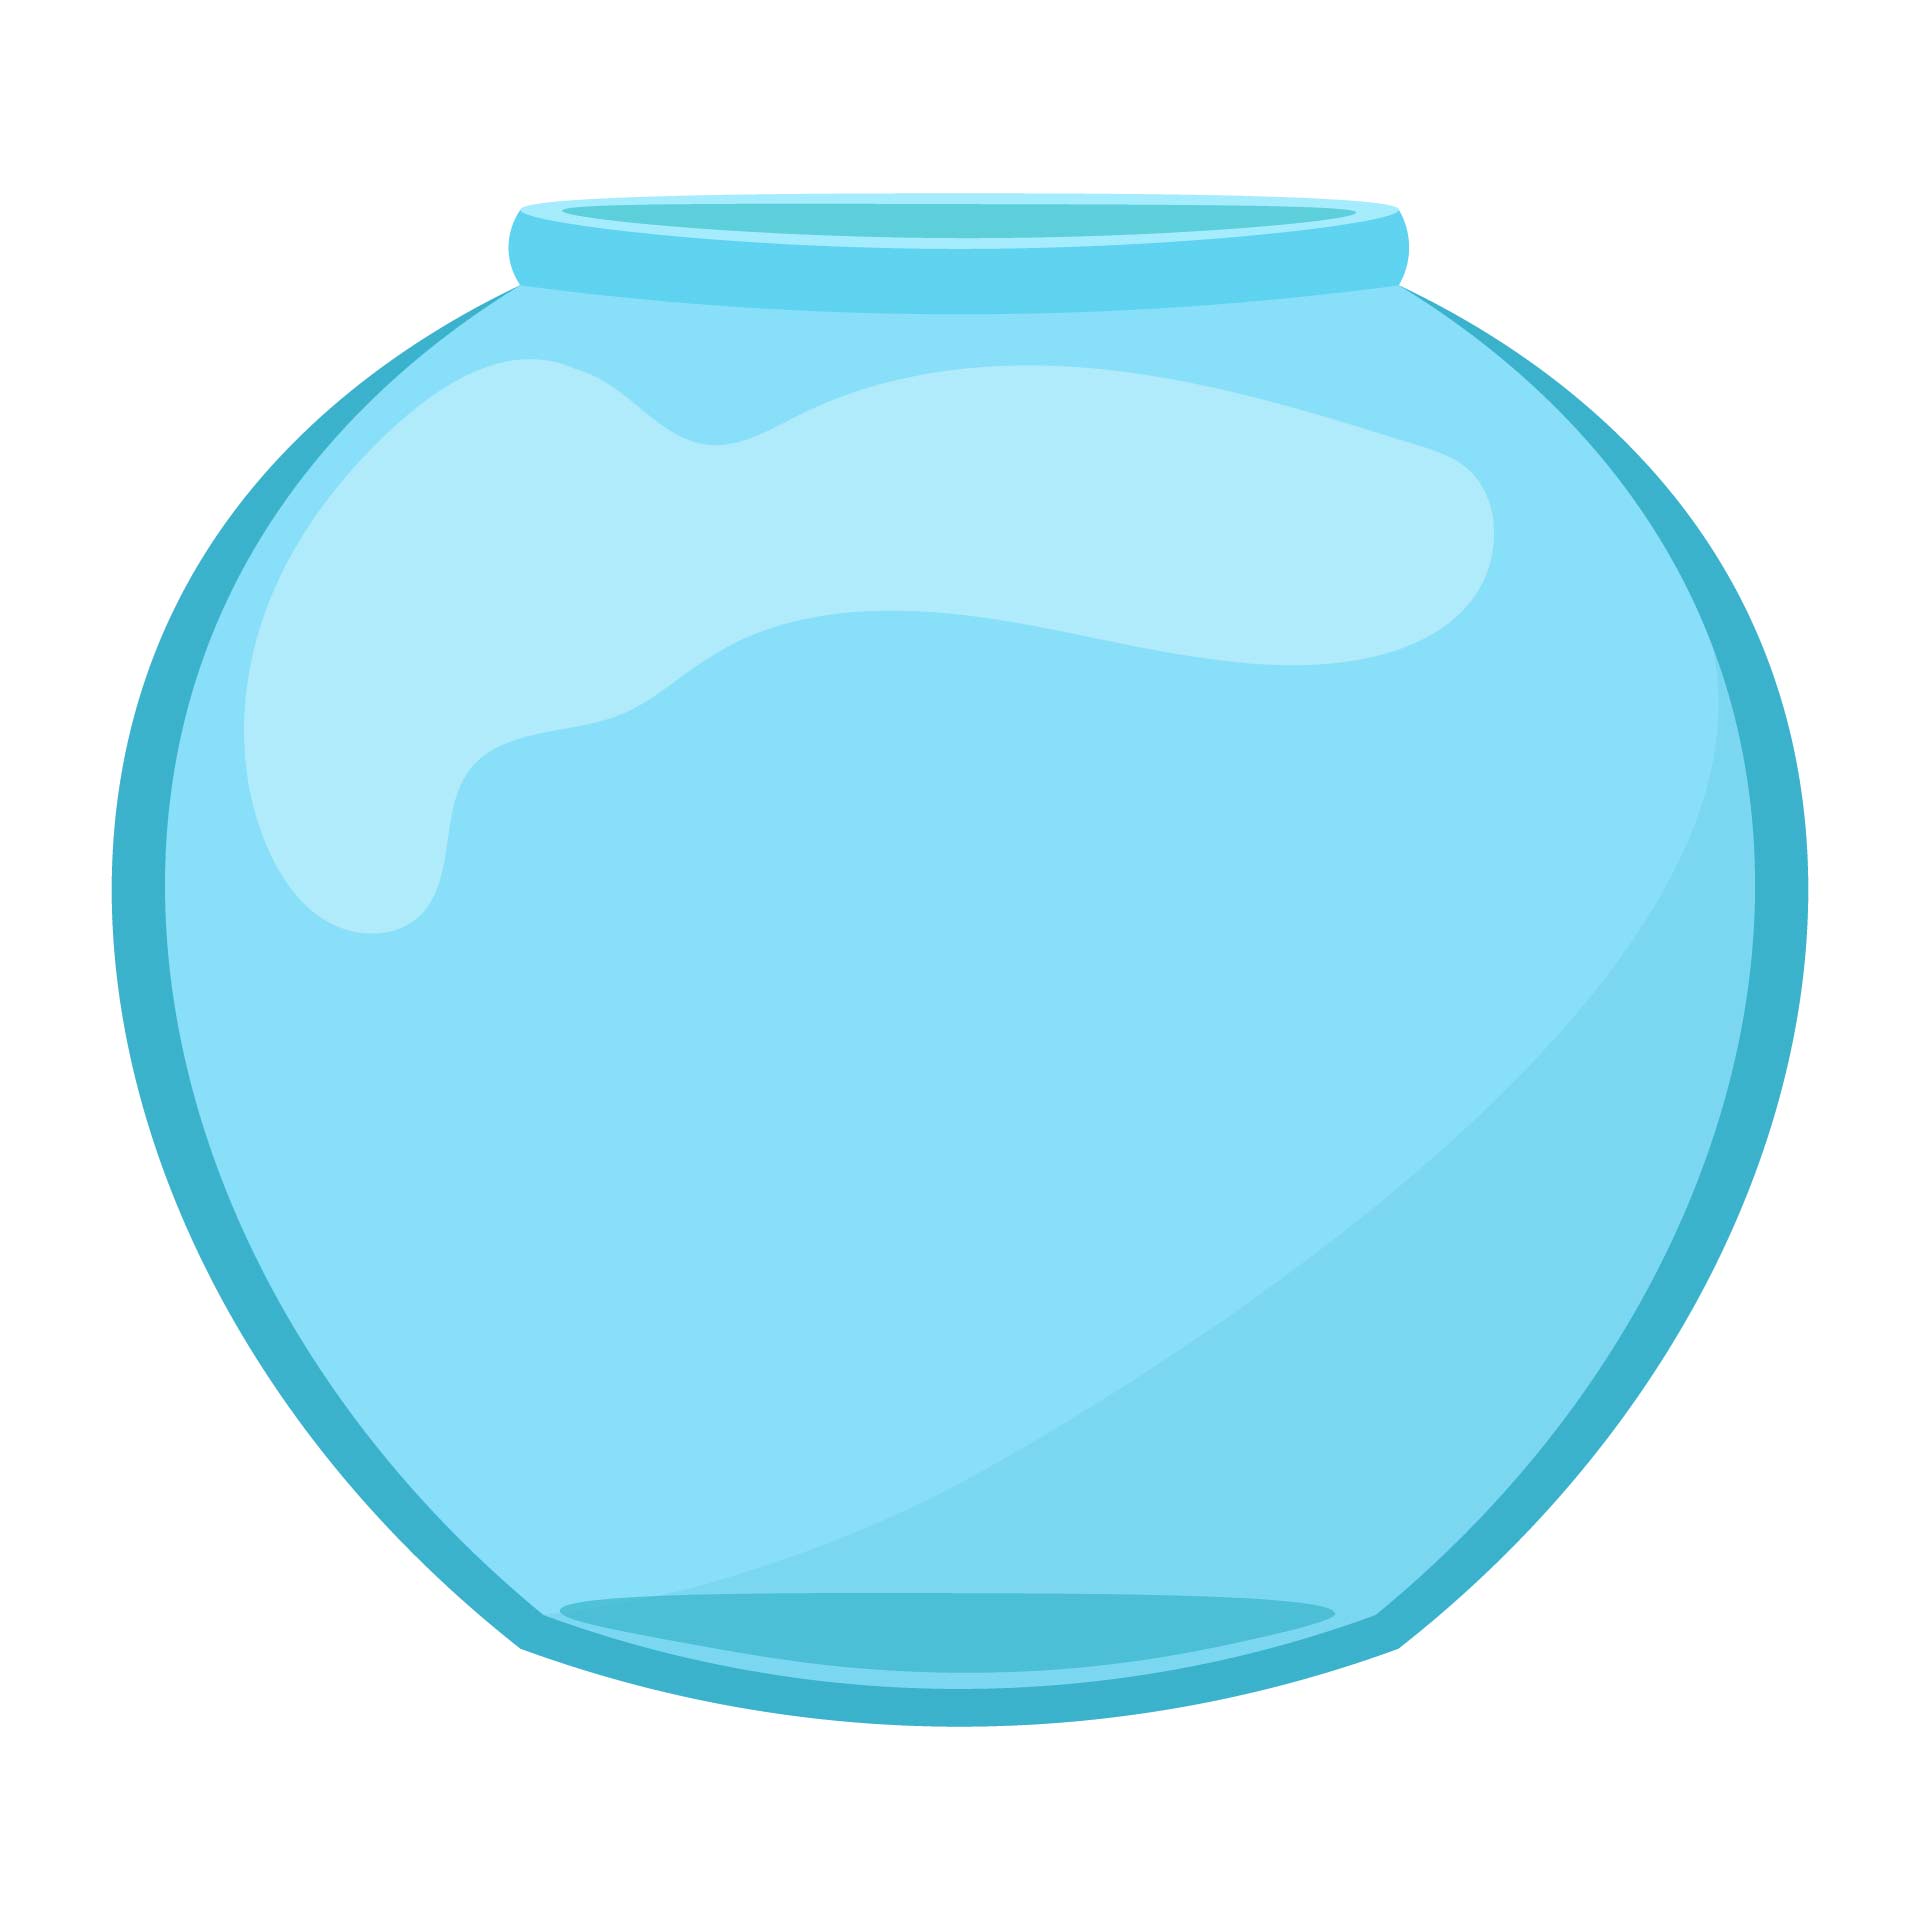 6 Best Images of Fish Bowl Template Printable - Fish Bowl Template ...